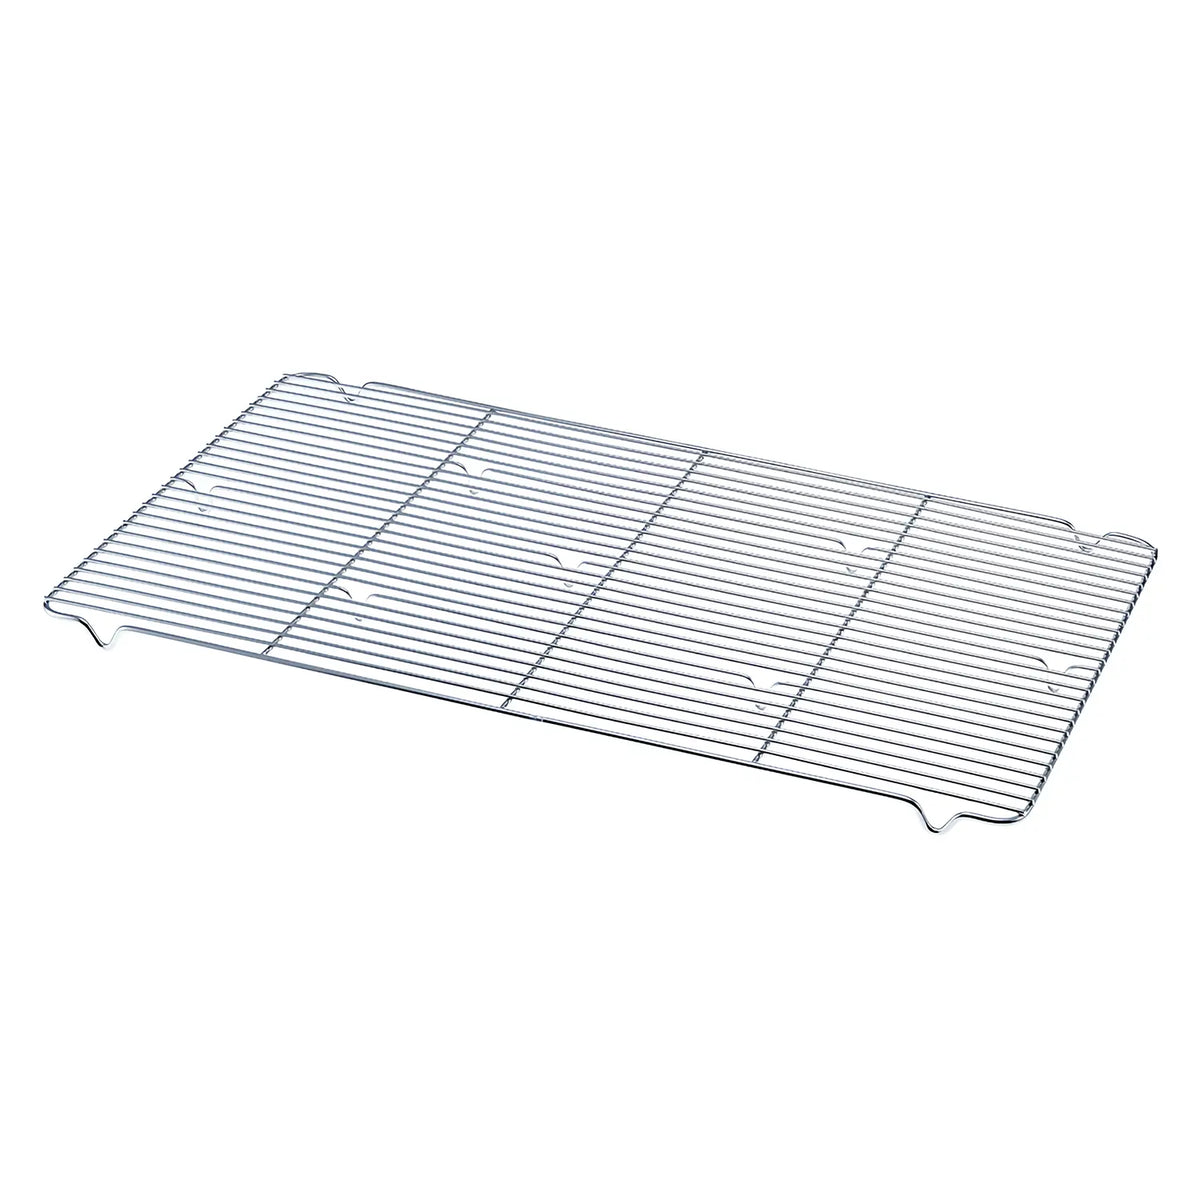 Three Snow Stainless Steel Durable Cooling Rack